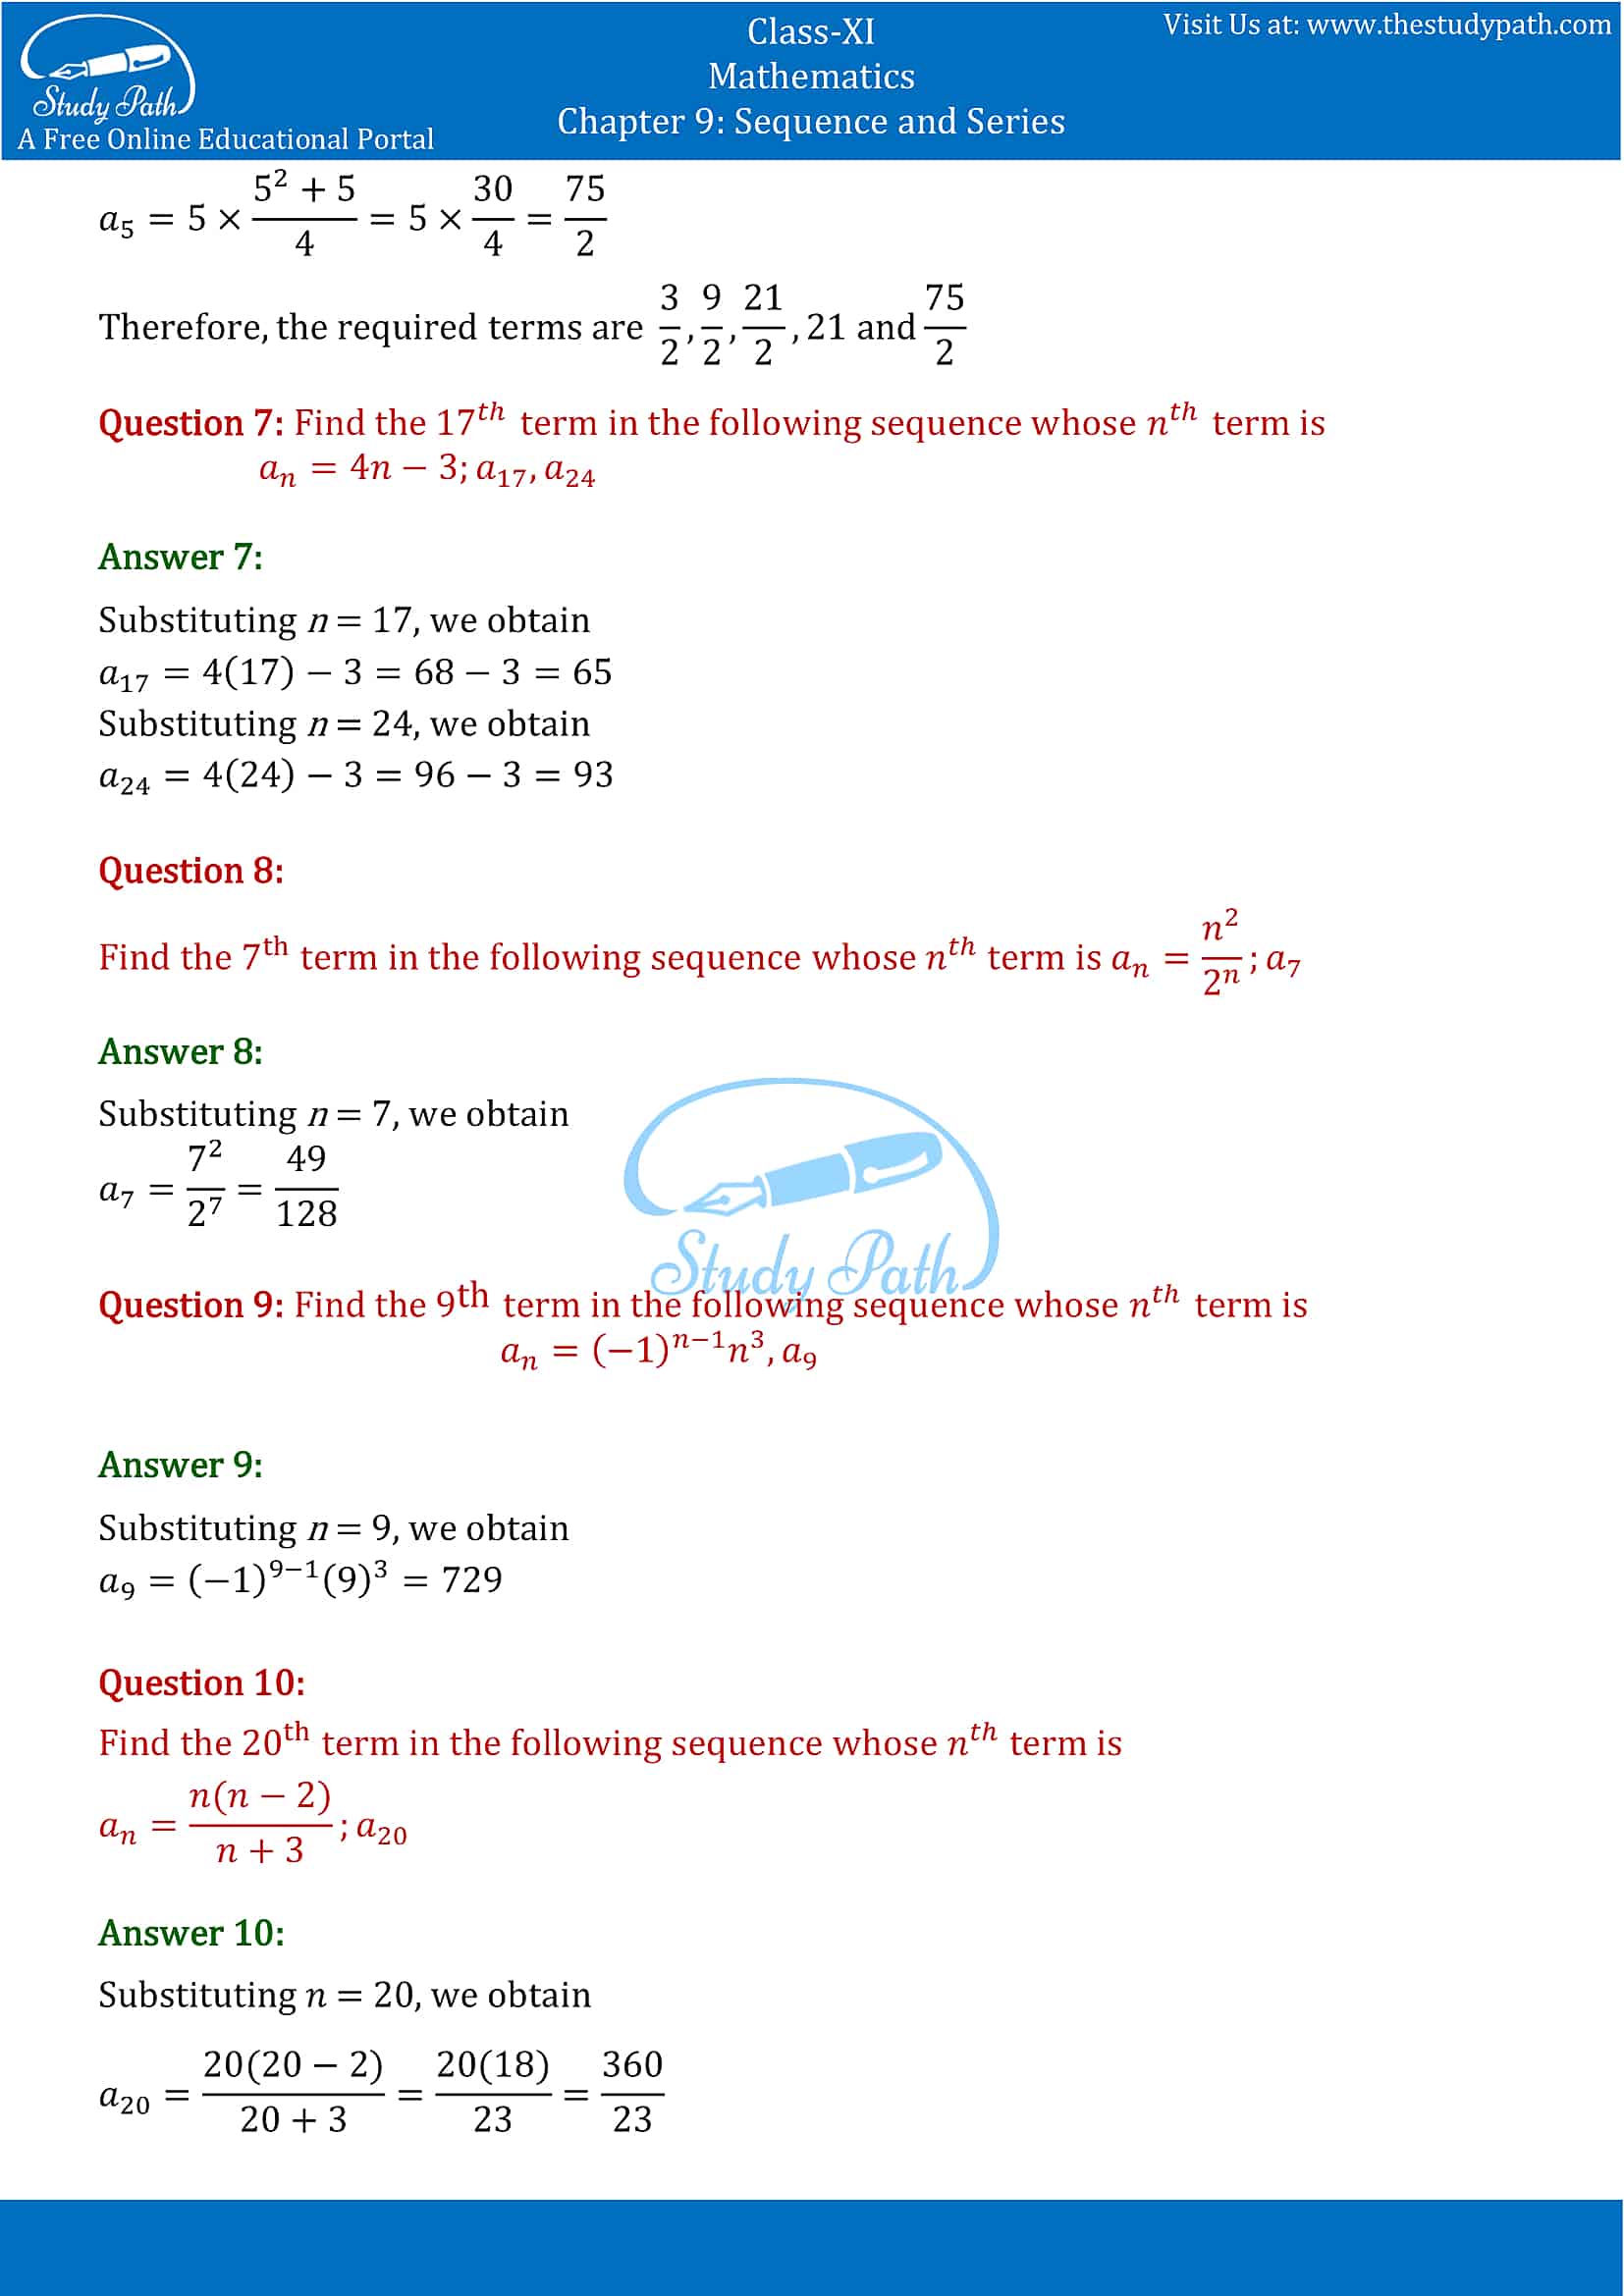 NCERT Solutions for Class 11 Maths chapter 9 Sequence and Series Part-3